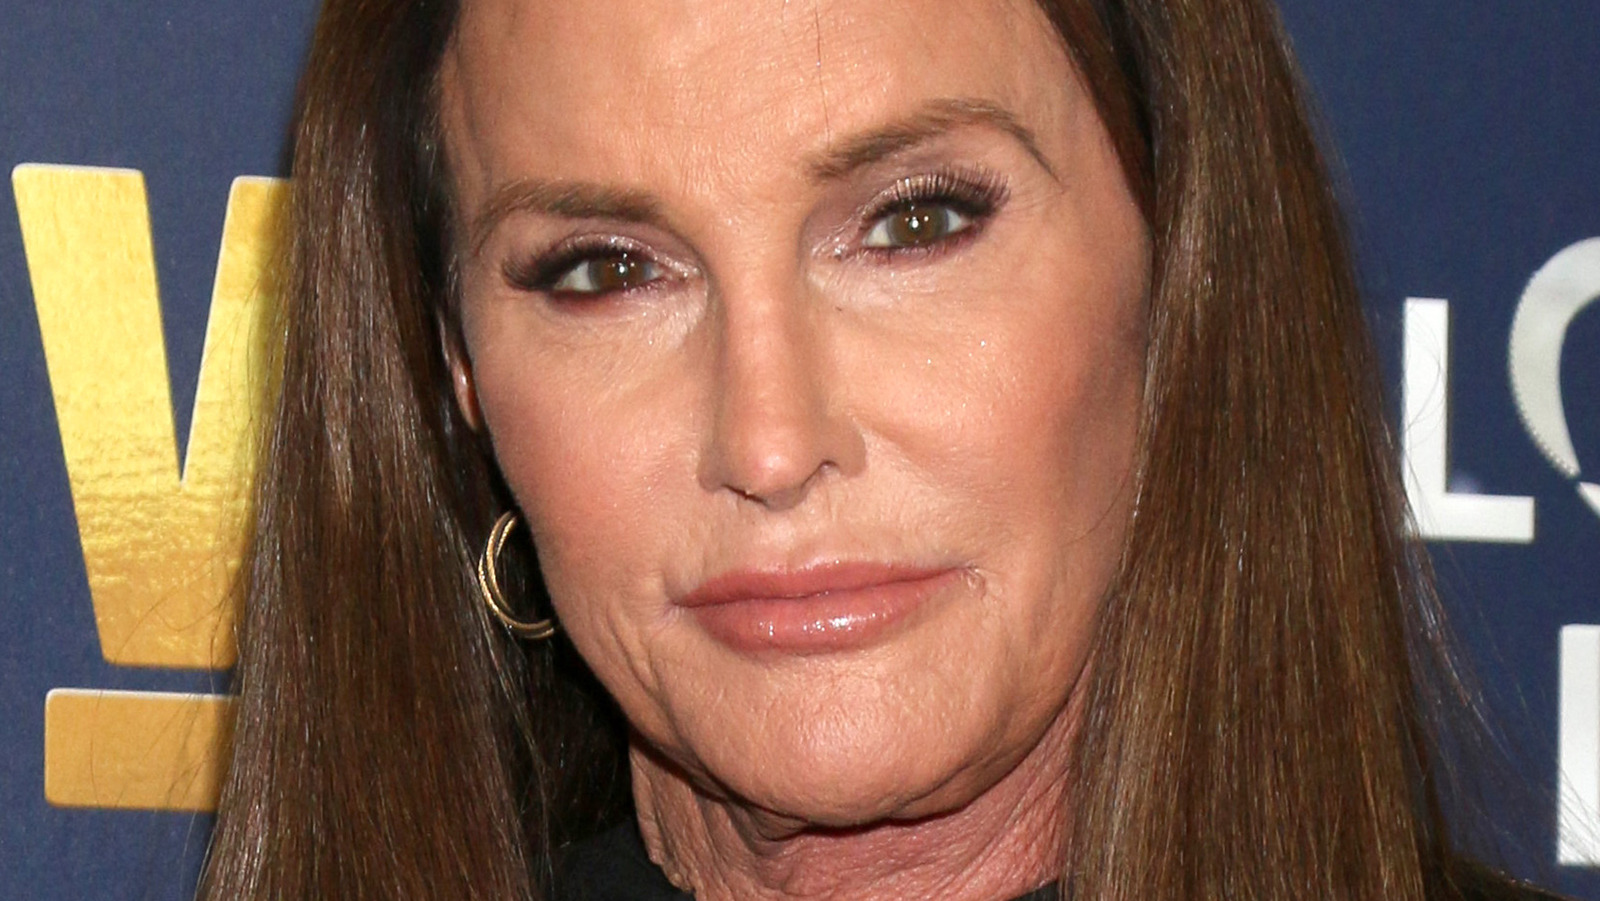 Caitlyn Jenner Won’t Make The Same Mistake Twice When Talking About Her Family